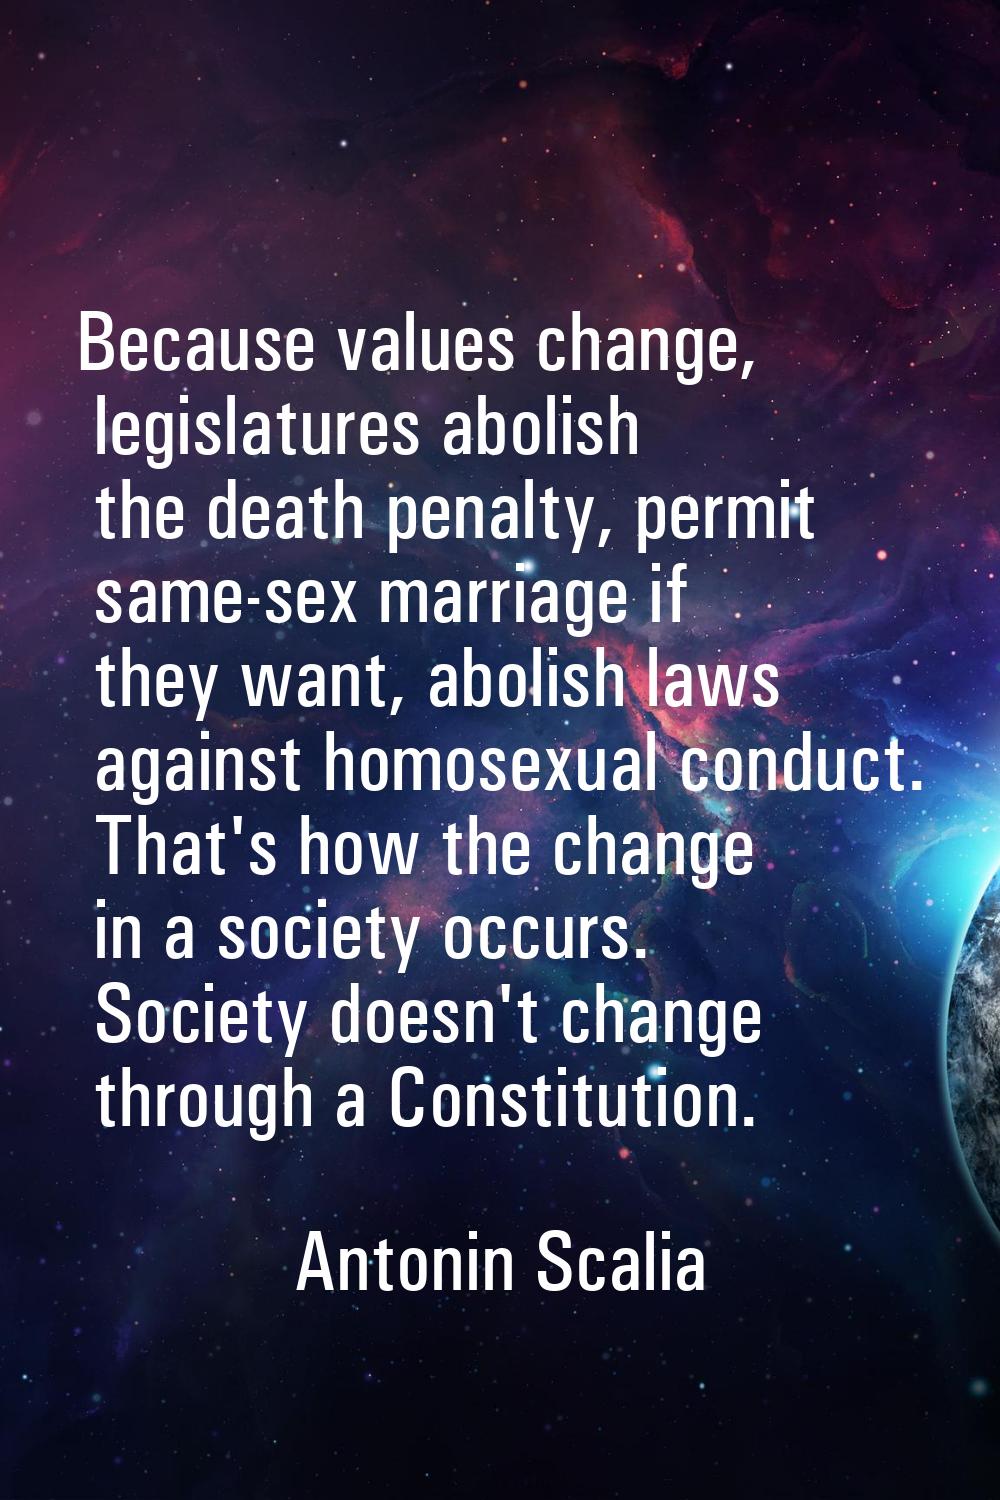 Because values change, legislatures abolish the death penalty, permit same-sex marriage if they wan